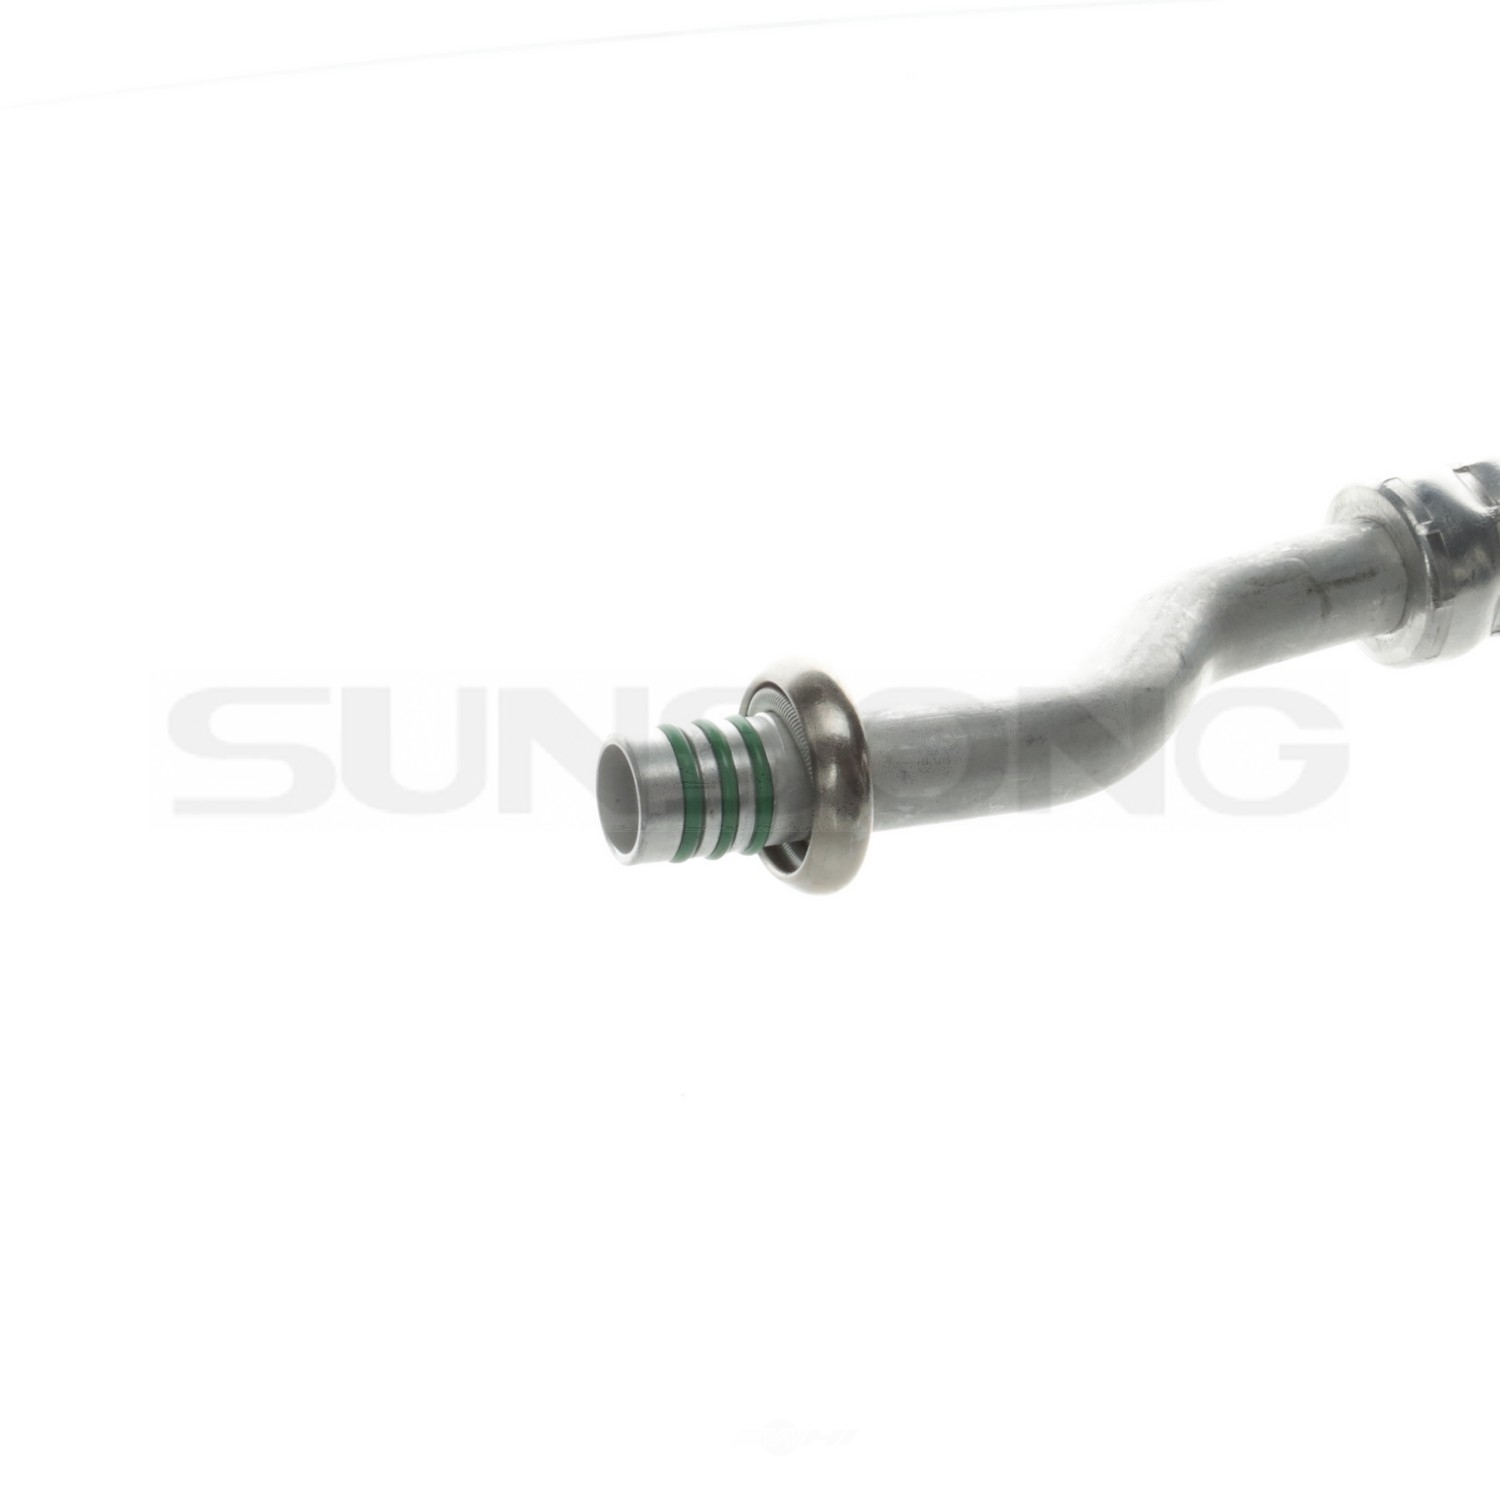 SUNSONG NORTH AMERICA - A/C Refrigerant Discharge / Suction Hose Assembly - SUG 5203070